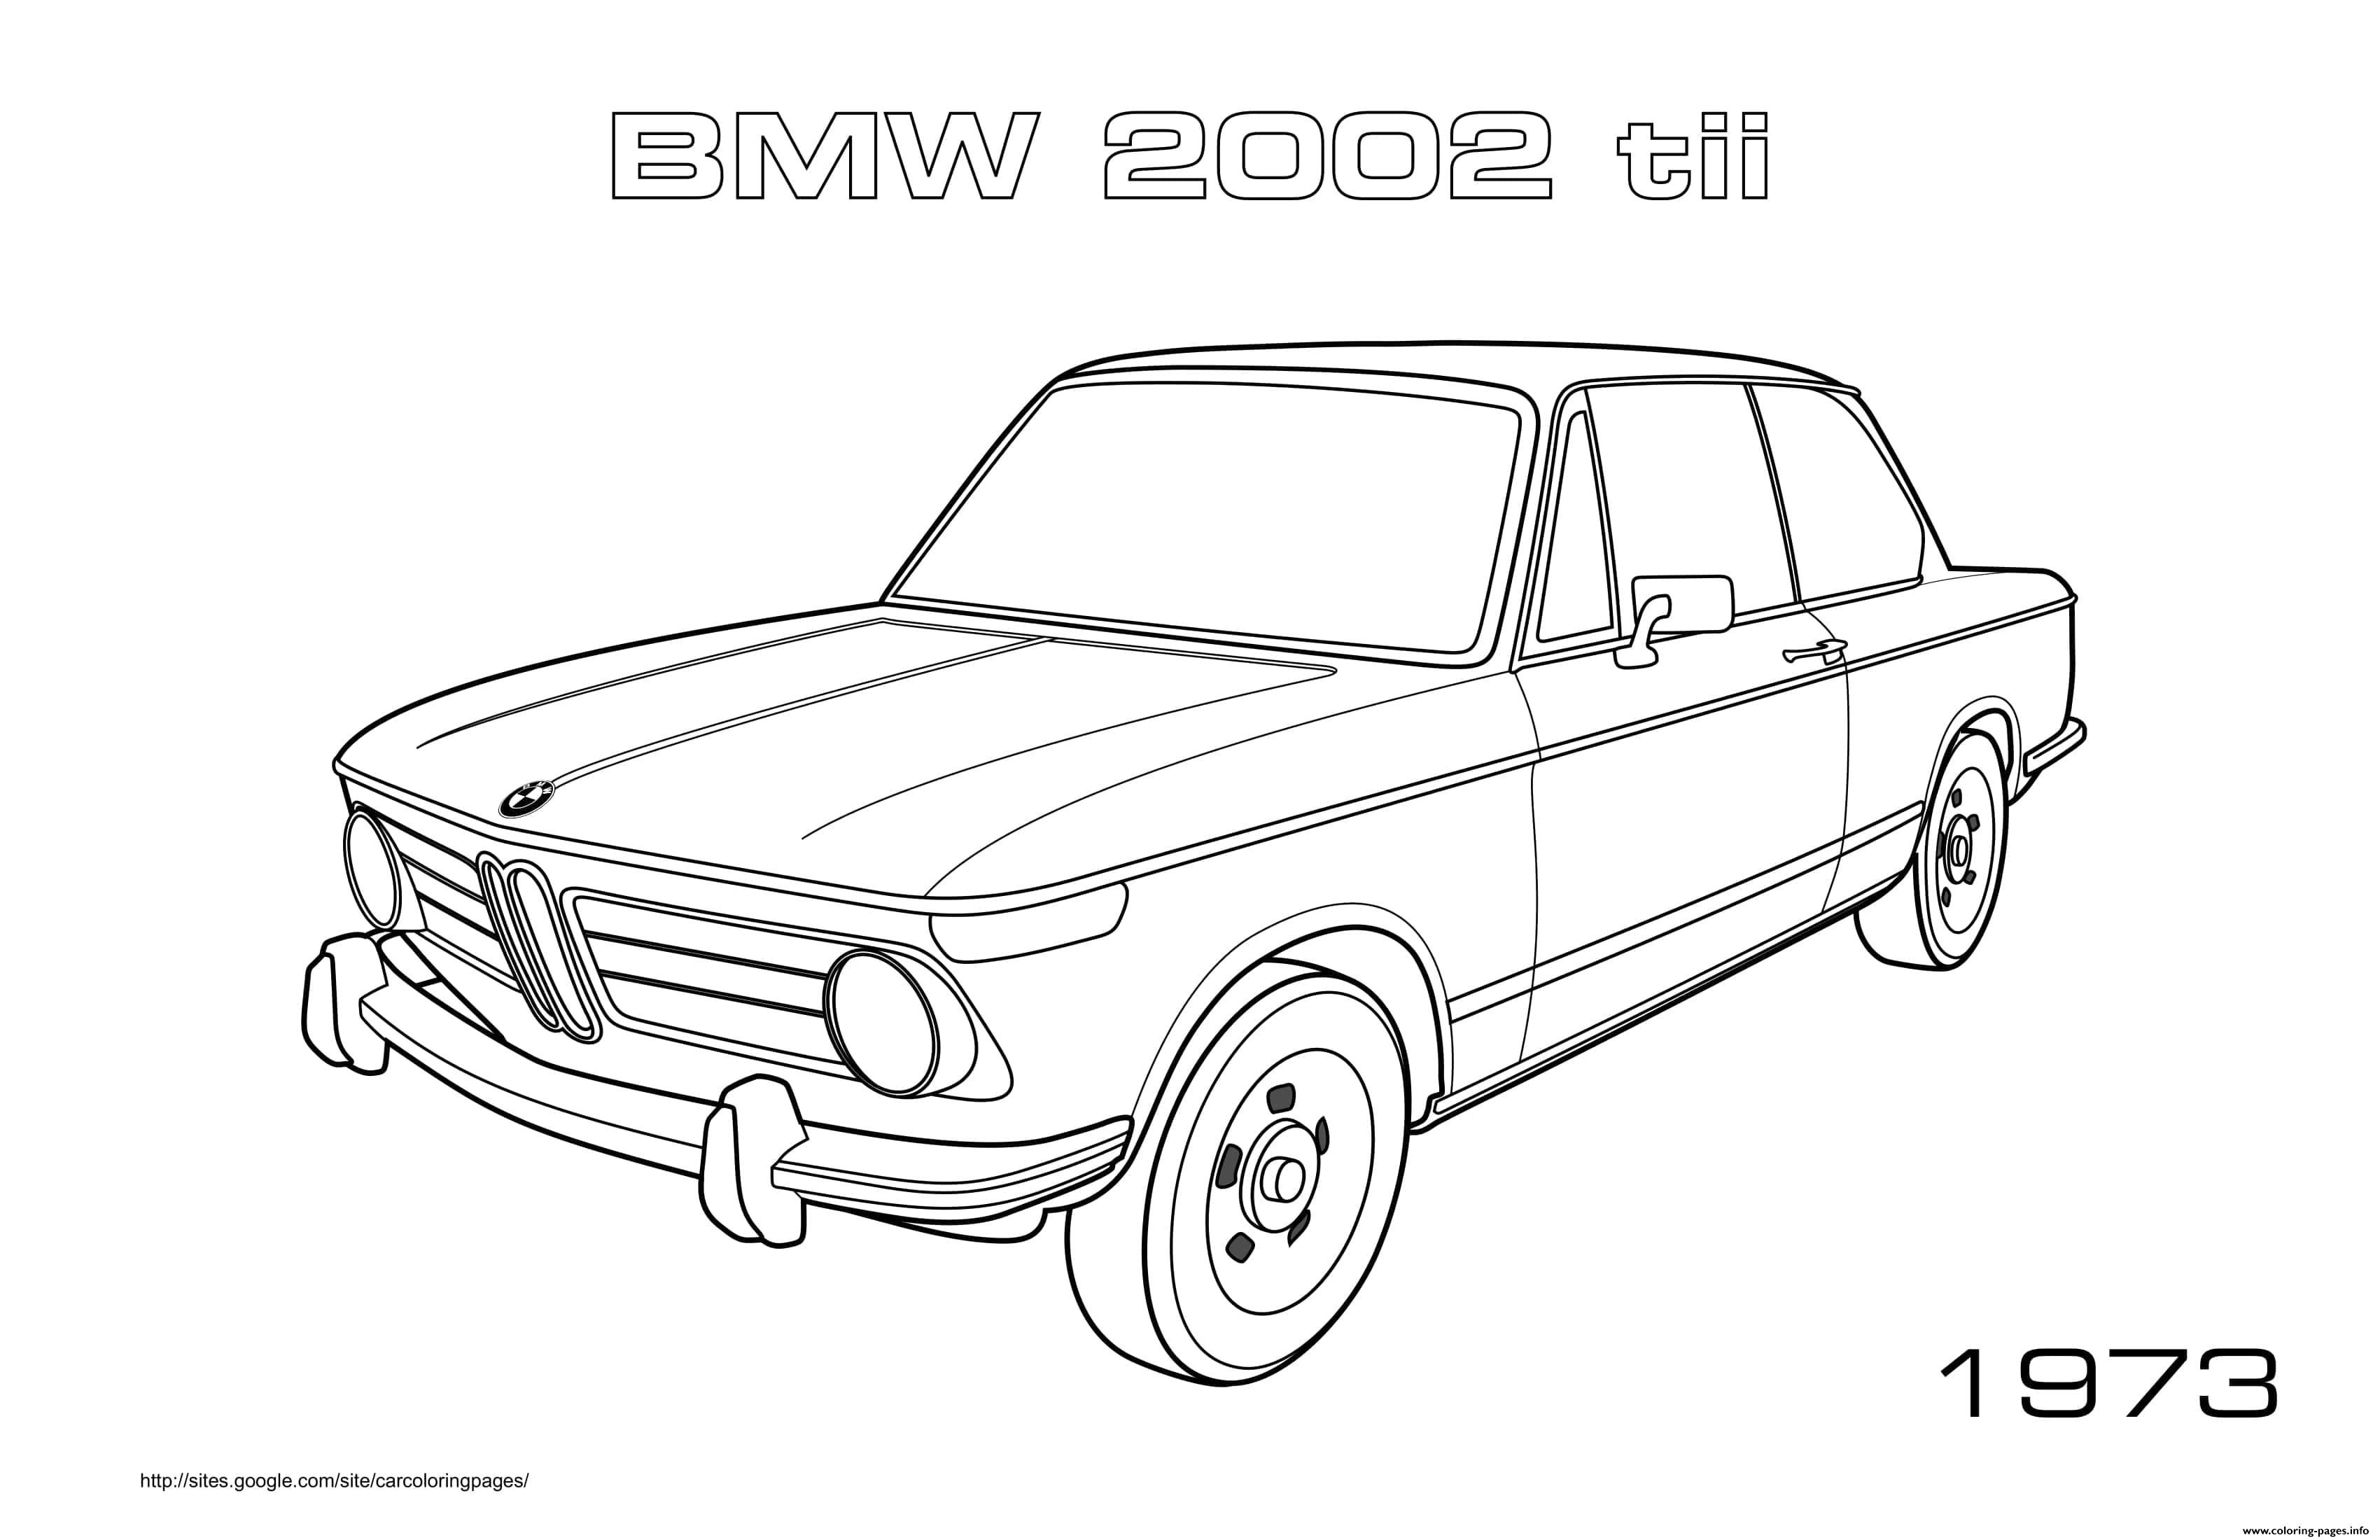 Bmw 2002 Tii 1973 coloring